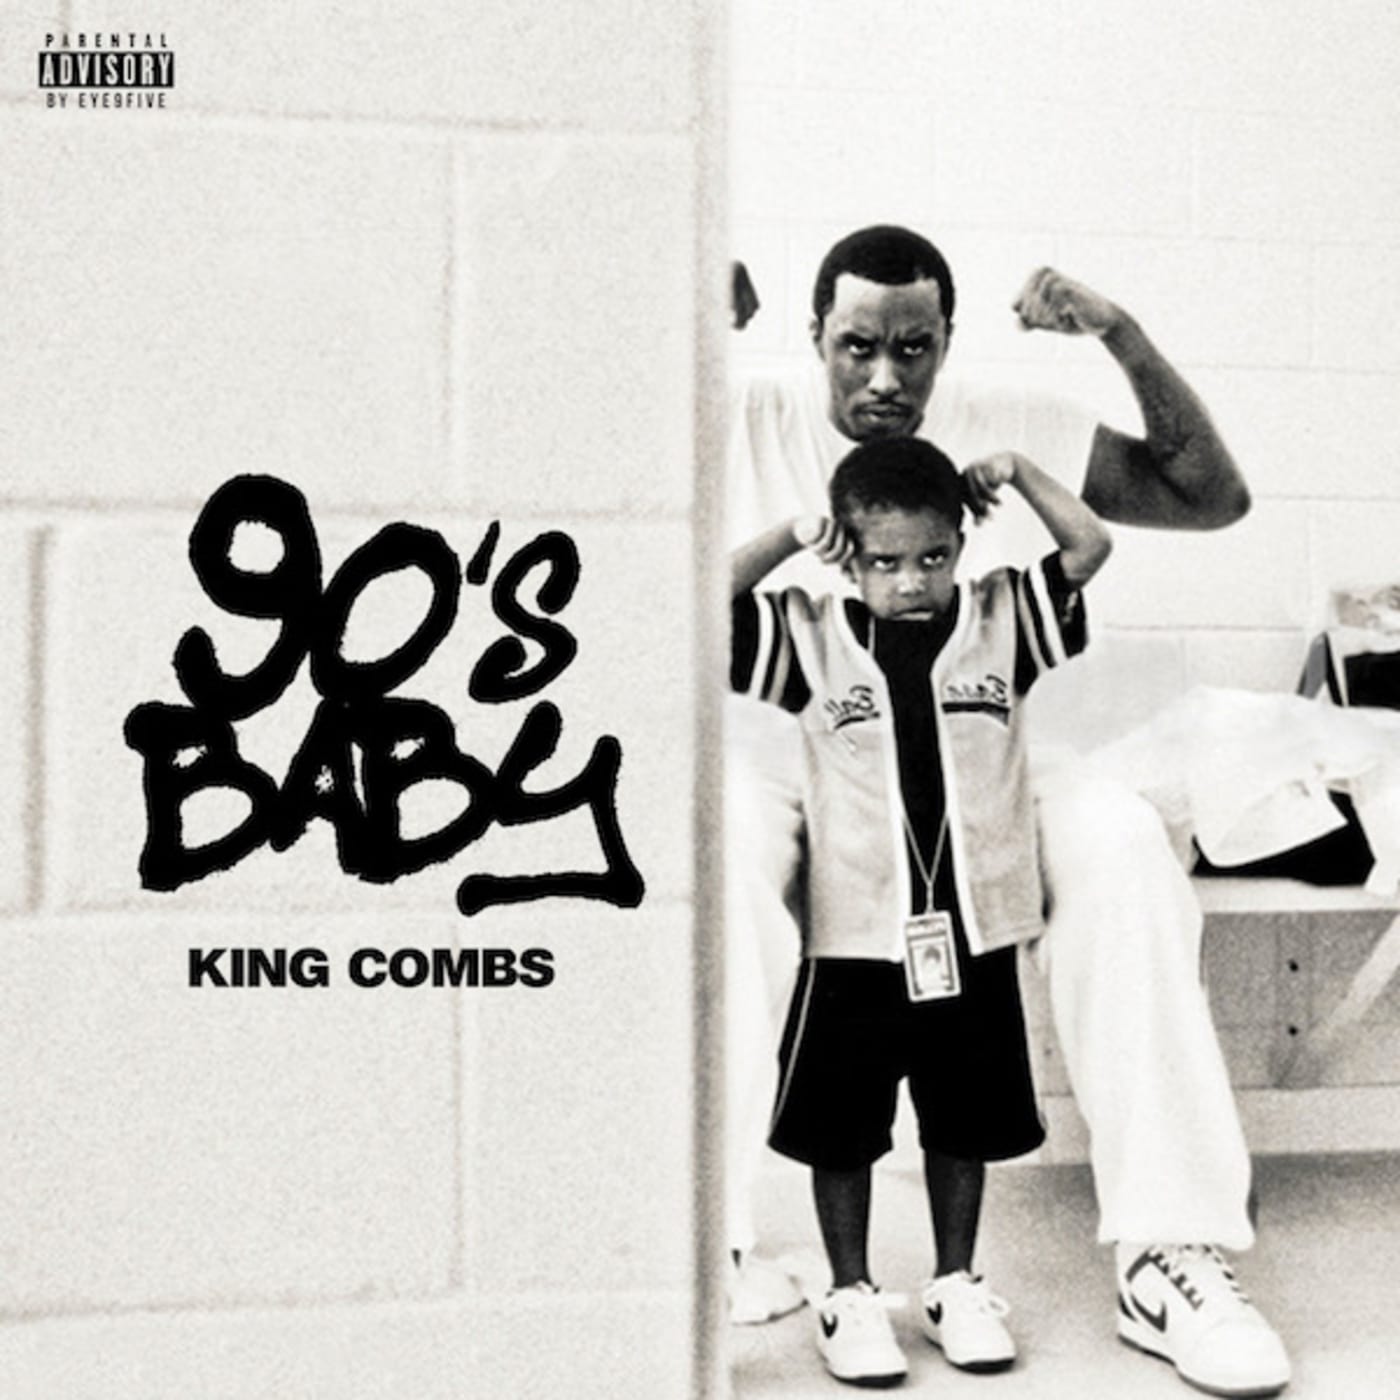 Cover art for King Comb's album '90's Baby'